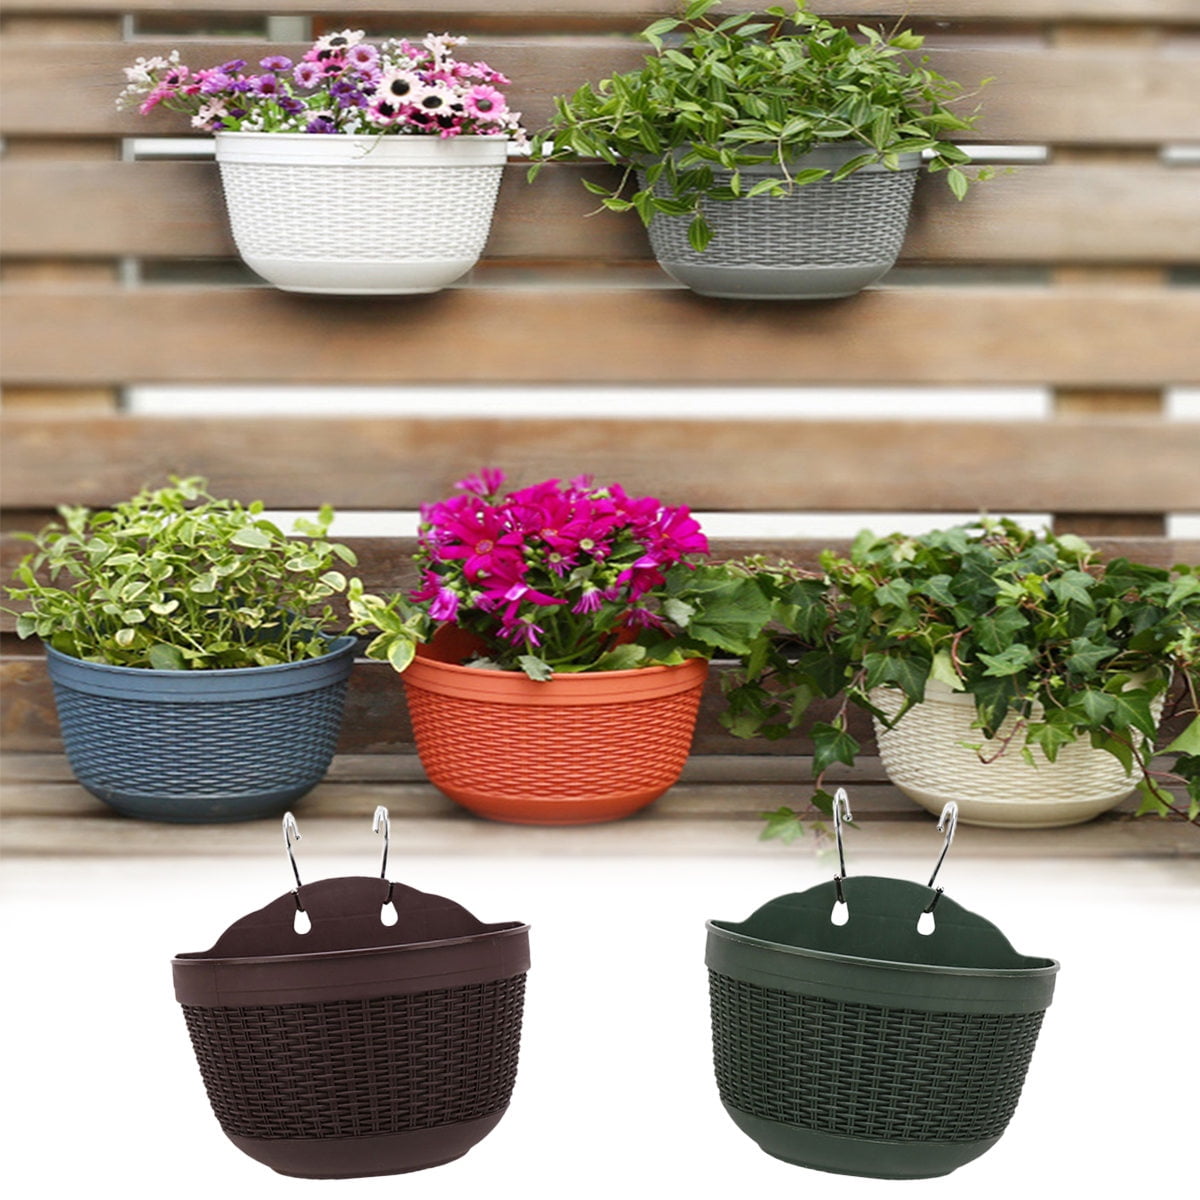 Artificial Plastic Plant Holders Hanging Wicker Flowers Home Decor Ornaments 